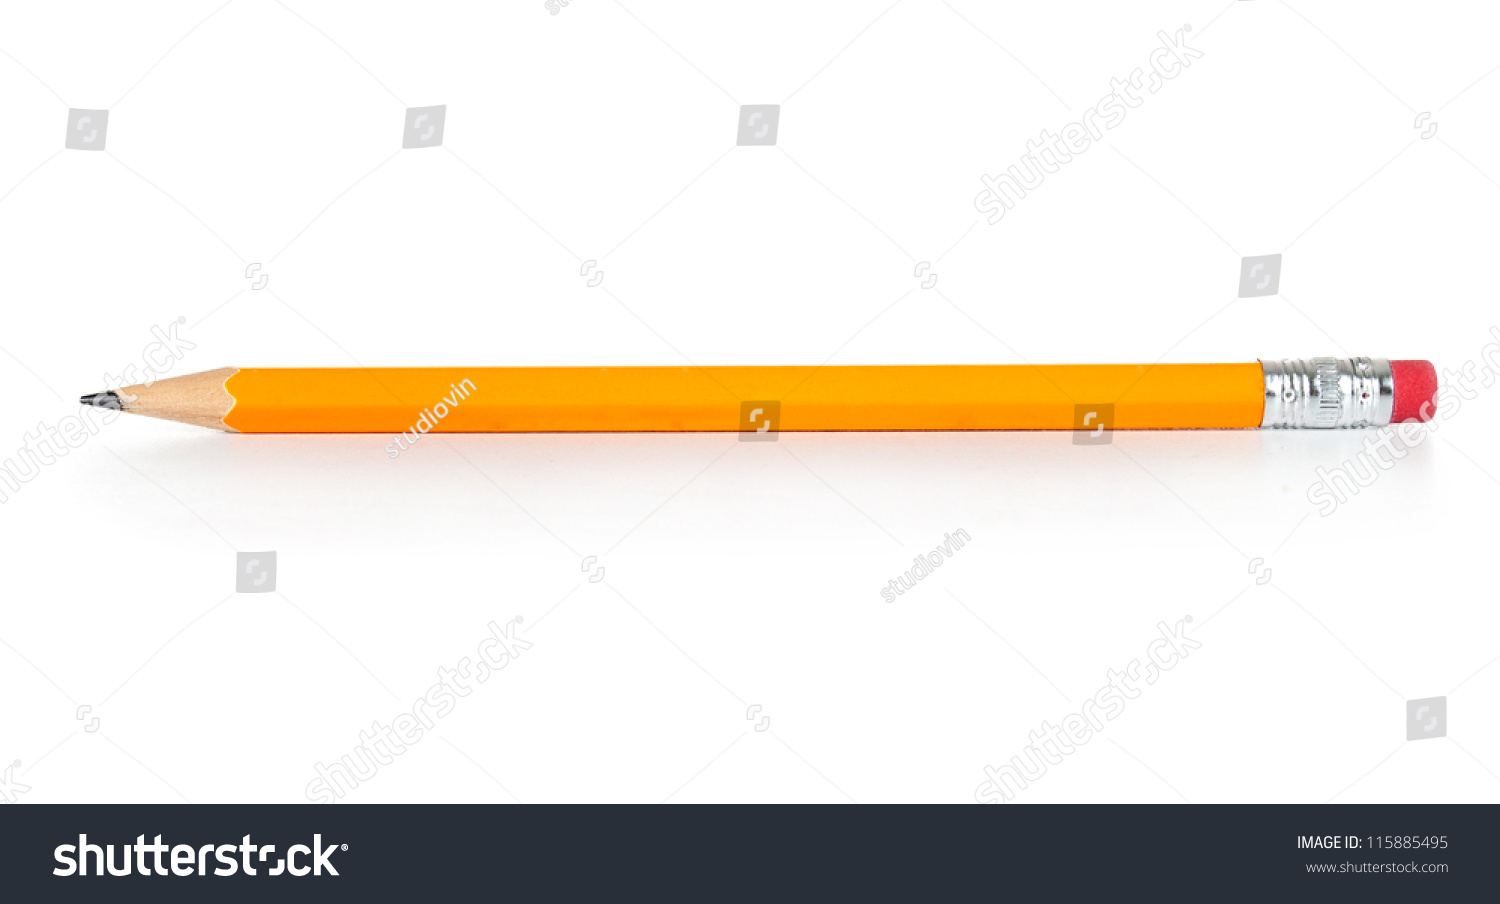 Pencil isolated on pure white background #115885495